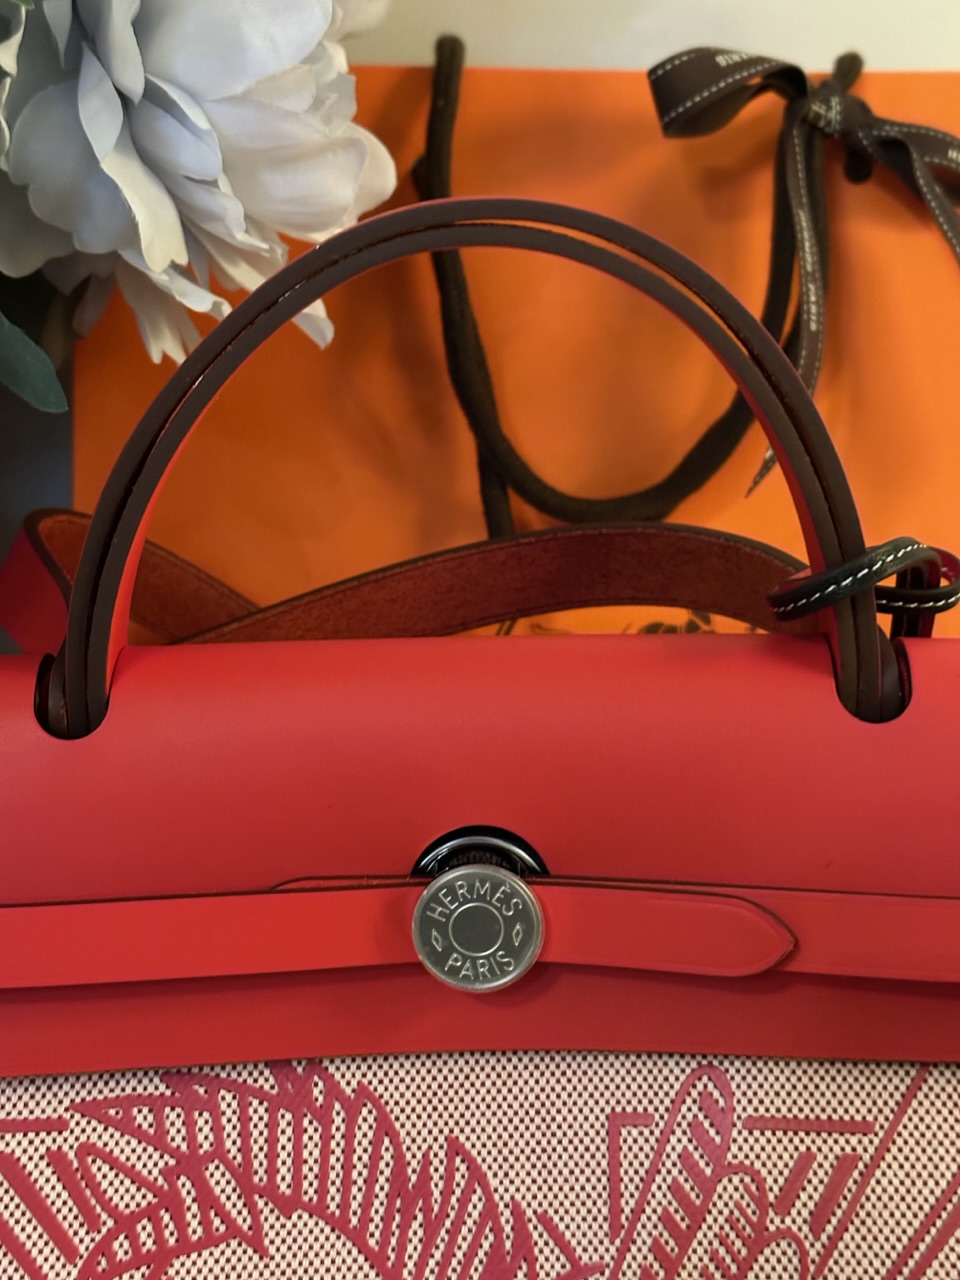 Hermes Herbag Zip Pegase Pop 31 Rouge Piment Special Edition